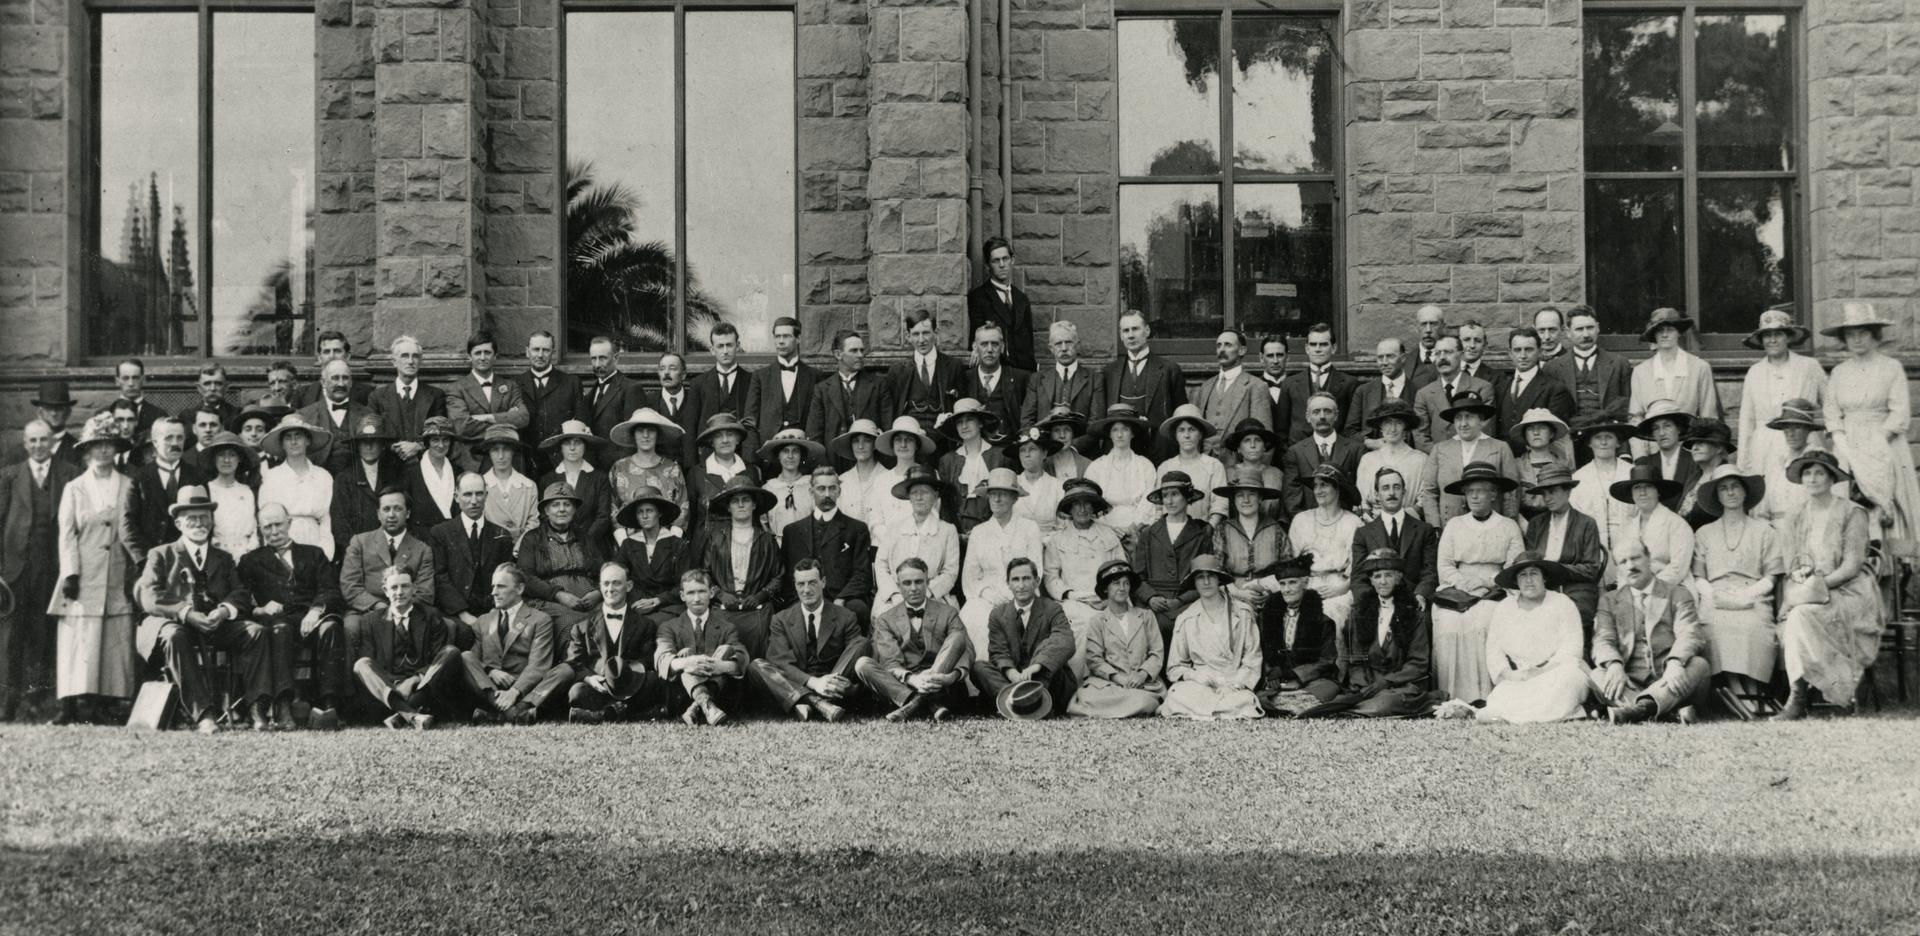 Extension Board and Workers' Education Association Conference, 1922